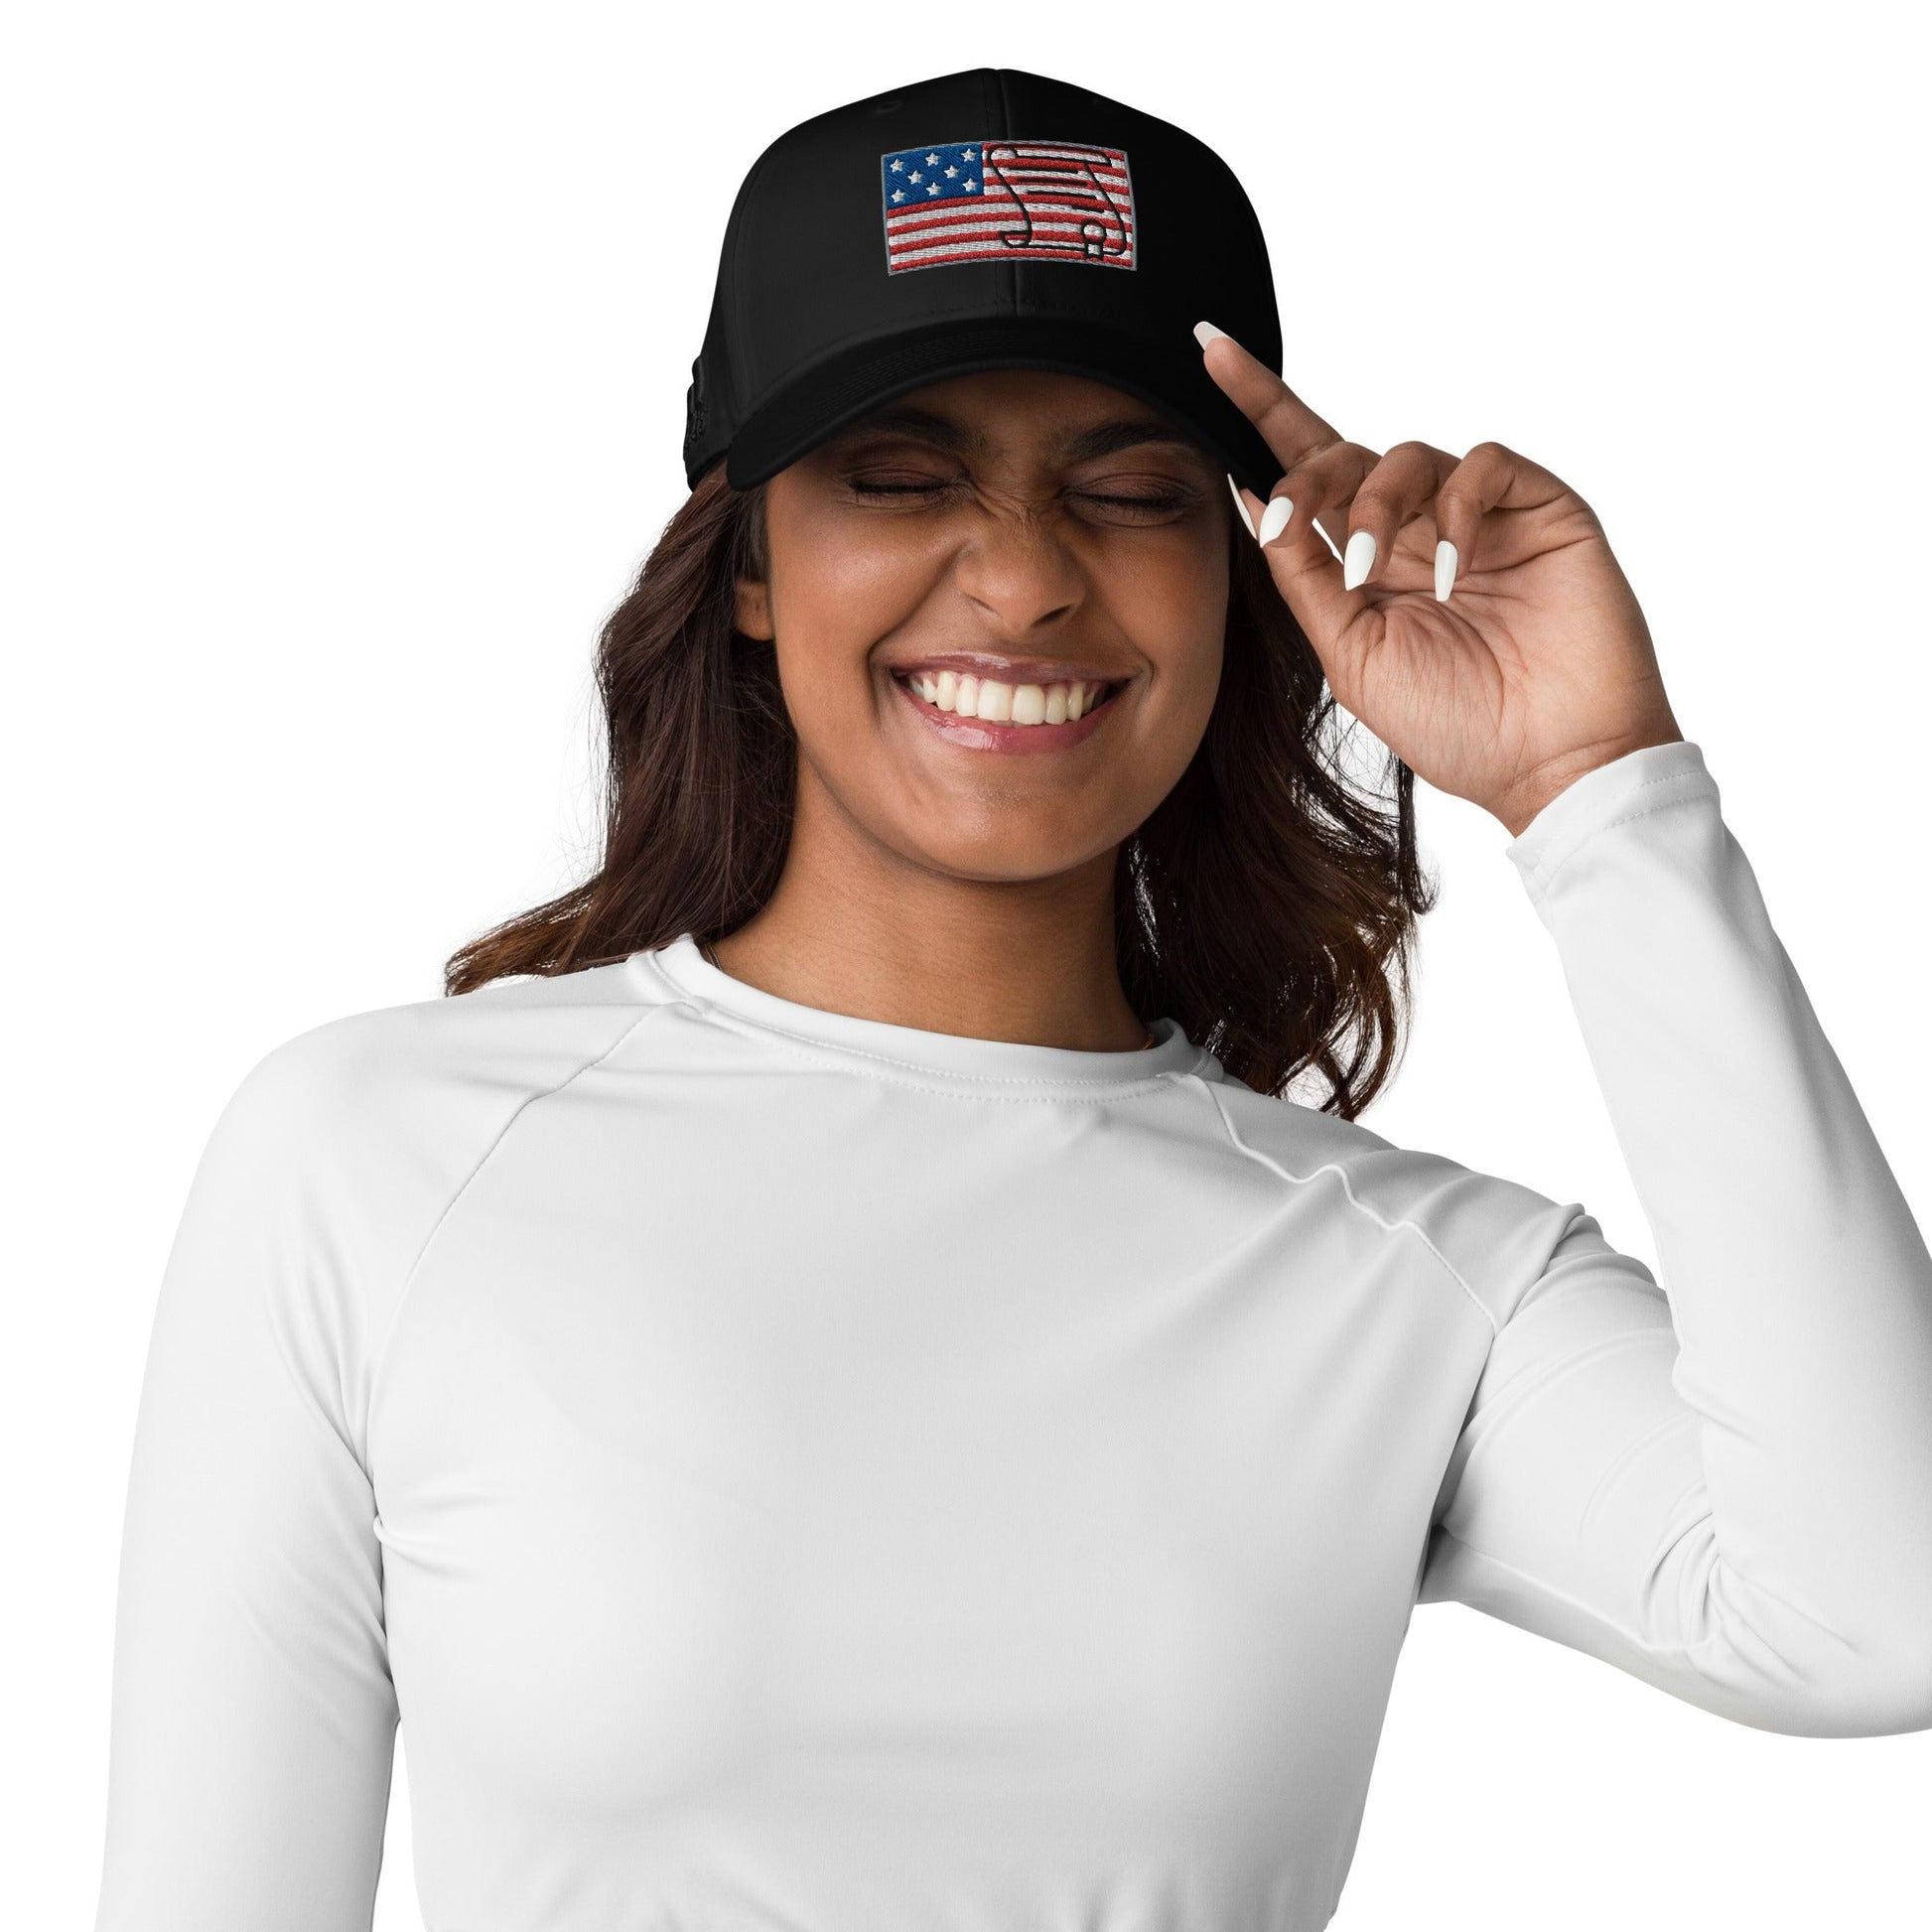 Unfurl Your Patriotism with our U.S.A. Flag and Constitution Adidas Dad Hat - A Stylish Blend of Heritage and Fashion! - Lizard Vigilante